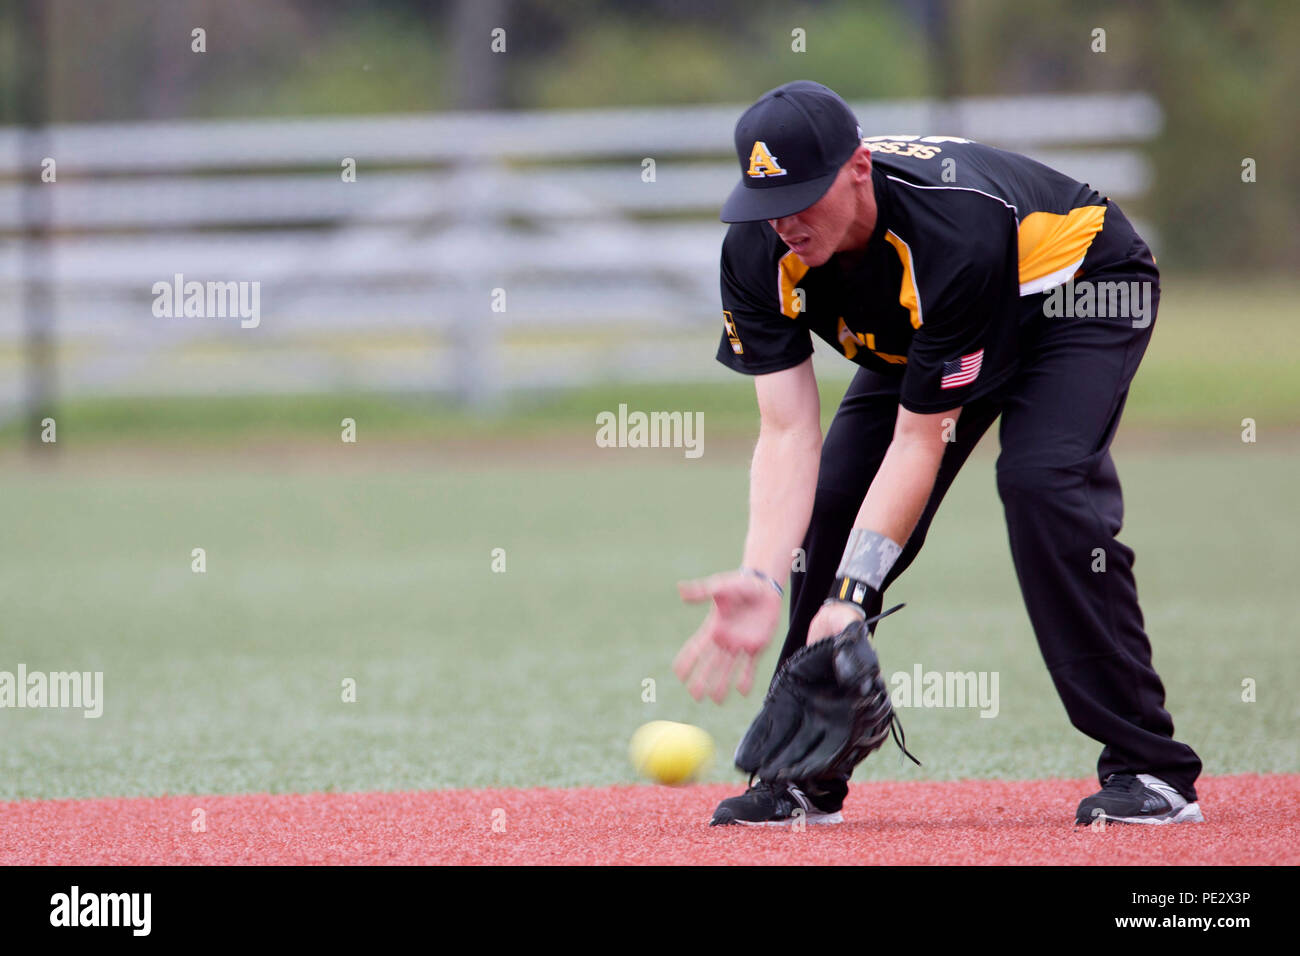 U.S. Army Sgt. Eric Sessom, infielder with the U.S. Army men’s softball team, catches a ball during the 2015 Armed Forces Softball Tournament at the intramural softball field on Camp Lejeune, N.C., Sept. 24, 2015. 160 athletes representing the U.S. Army, Marine Corps, Navy, and Air Force competed during a weeklong softball tournament hosted by Marine Corps Community Services. (U.S. Marine Corps photo by Lance Cpl. Austin M. Schlosser, MCIEAST-MCB CAMLEJ Combat Camera/Released) Stock Photo